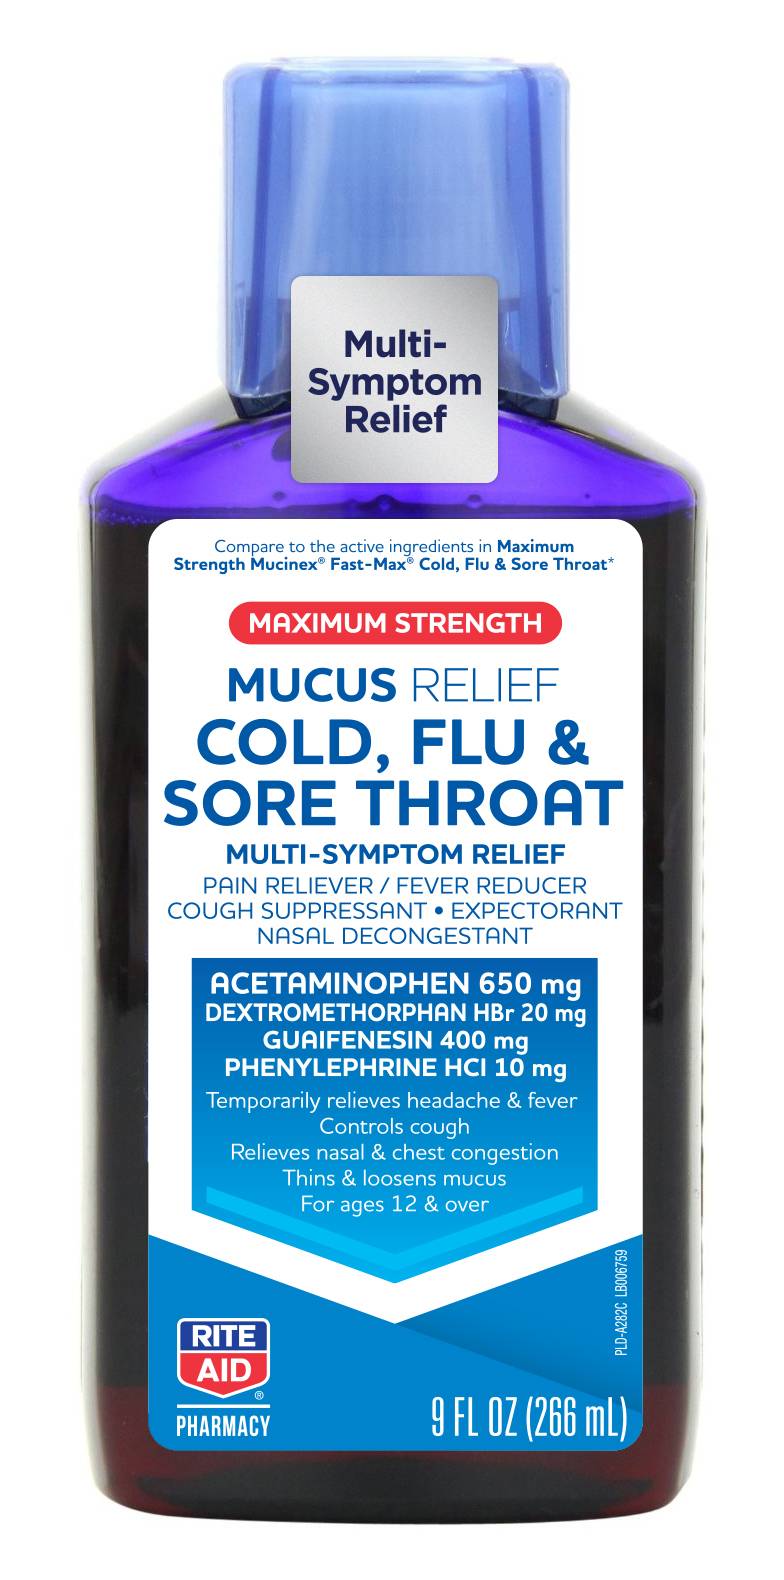 Rite Aid Mucus Relief for Cold, Flu & Sore Throat, Max Strength - 9 oz